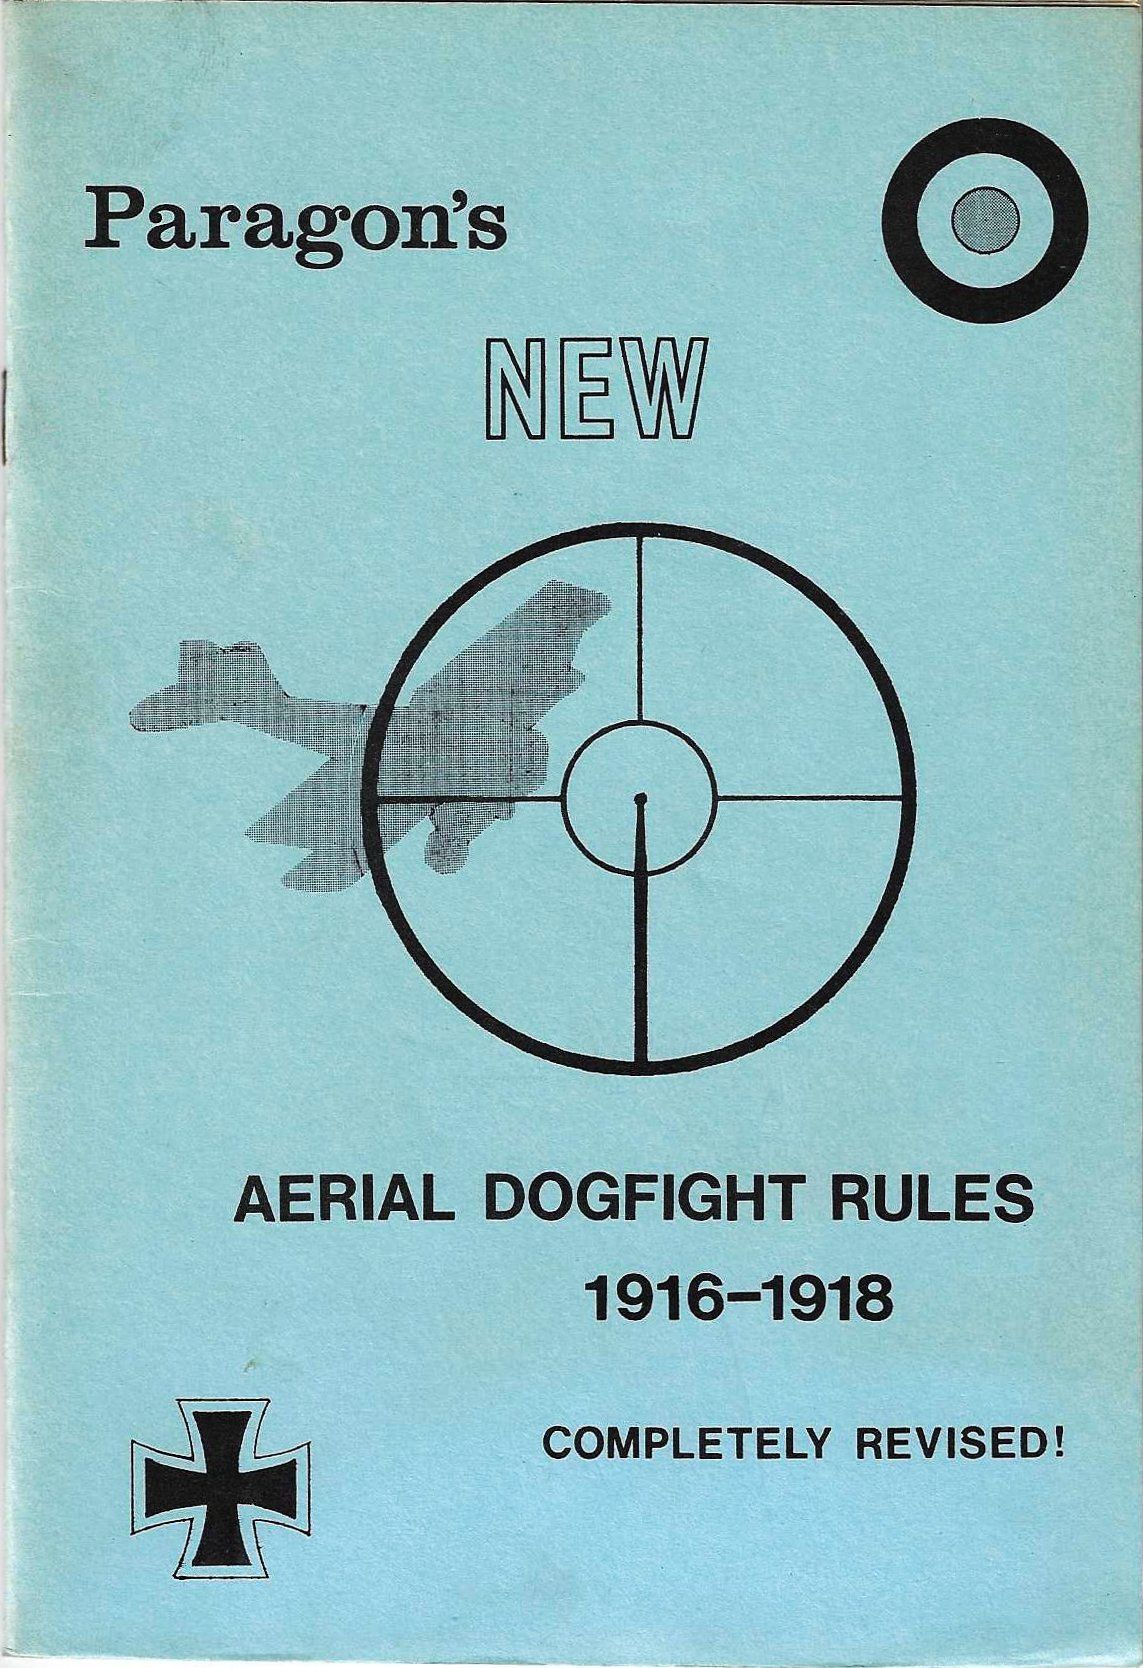 Paragon's New Aerial Dogfight Rules 1916-1918